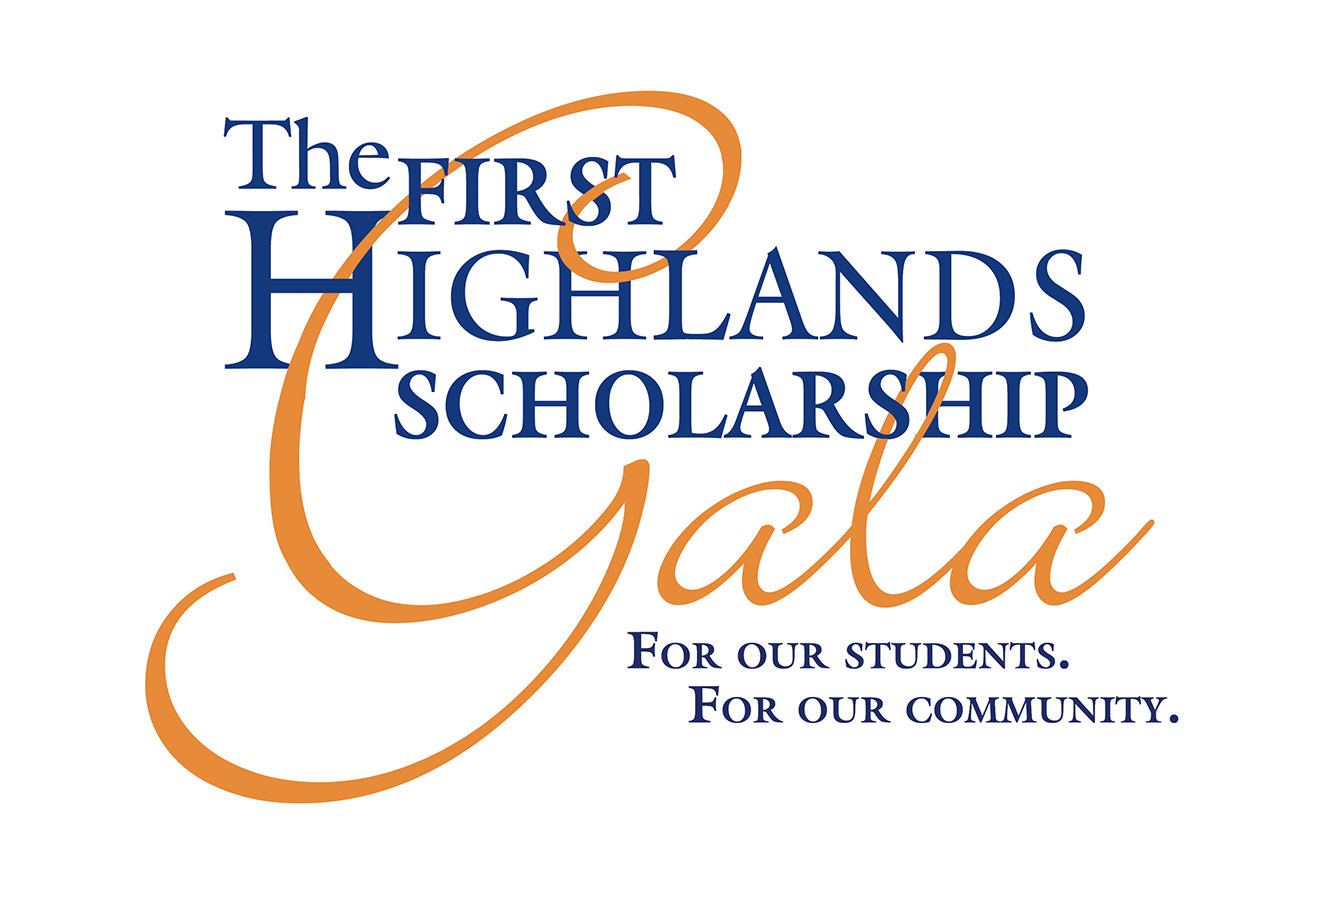 The First Highlands Scholarship Gala | For our students. For our community.